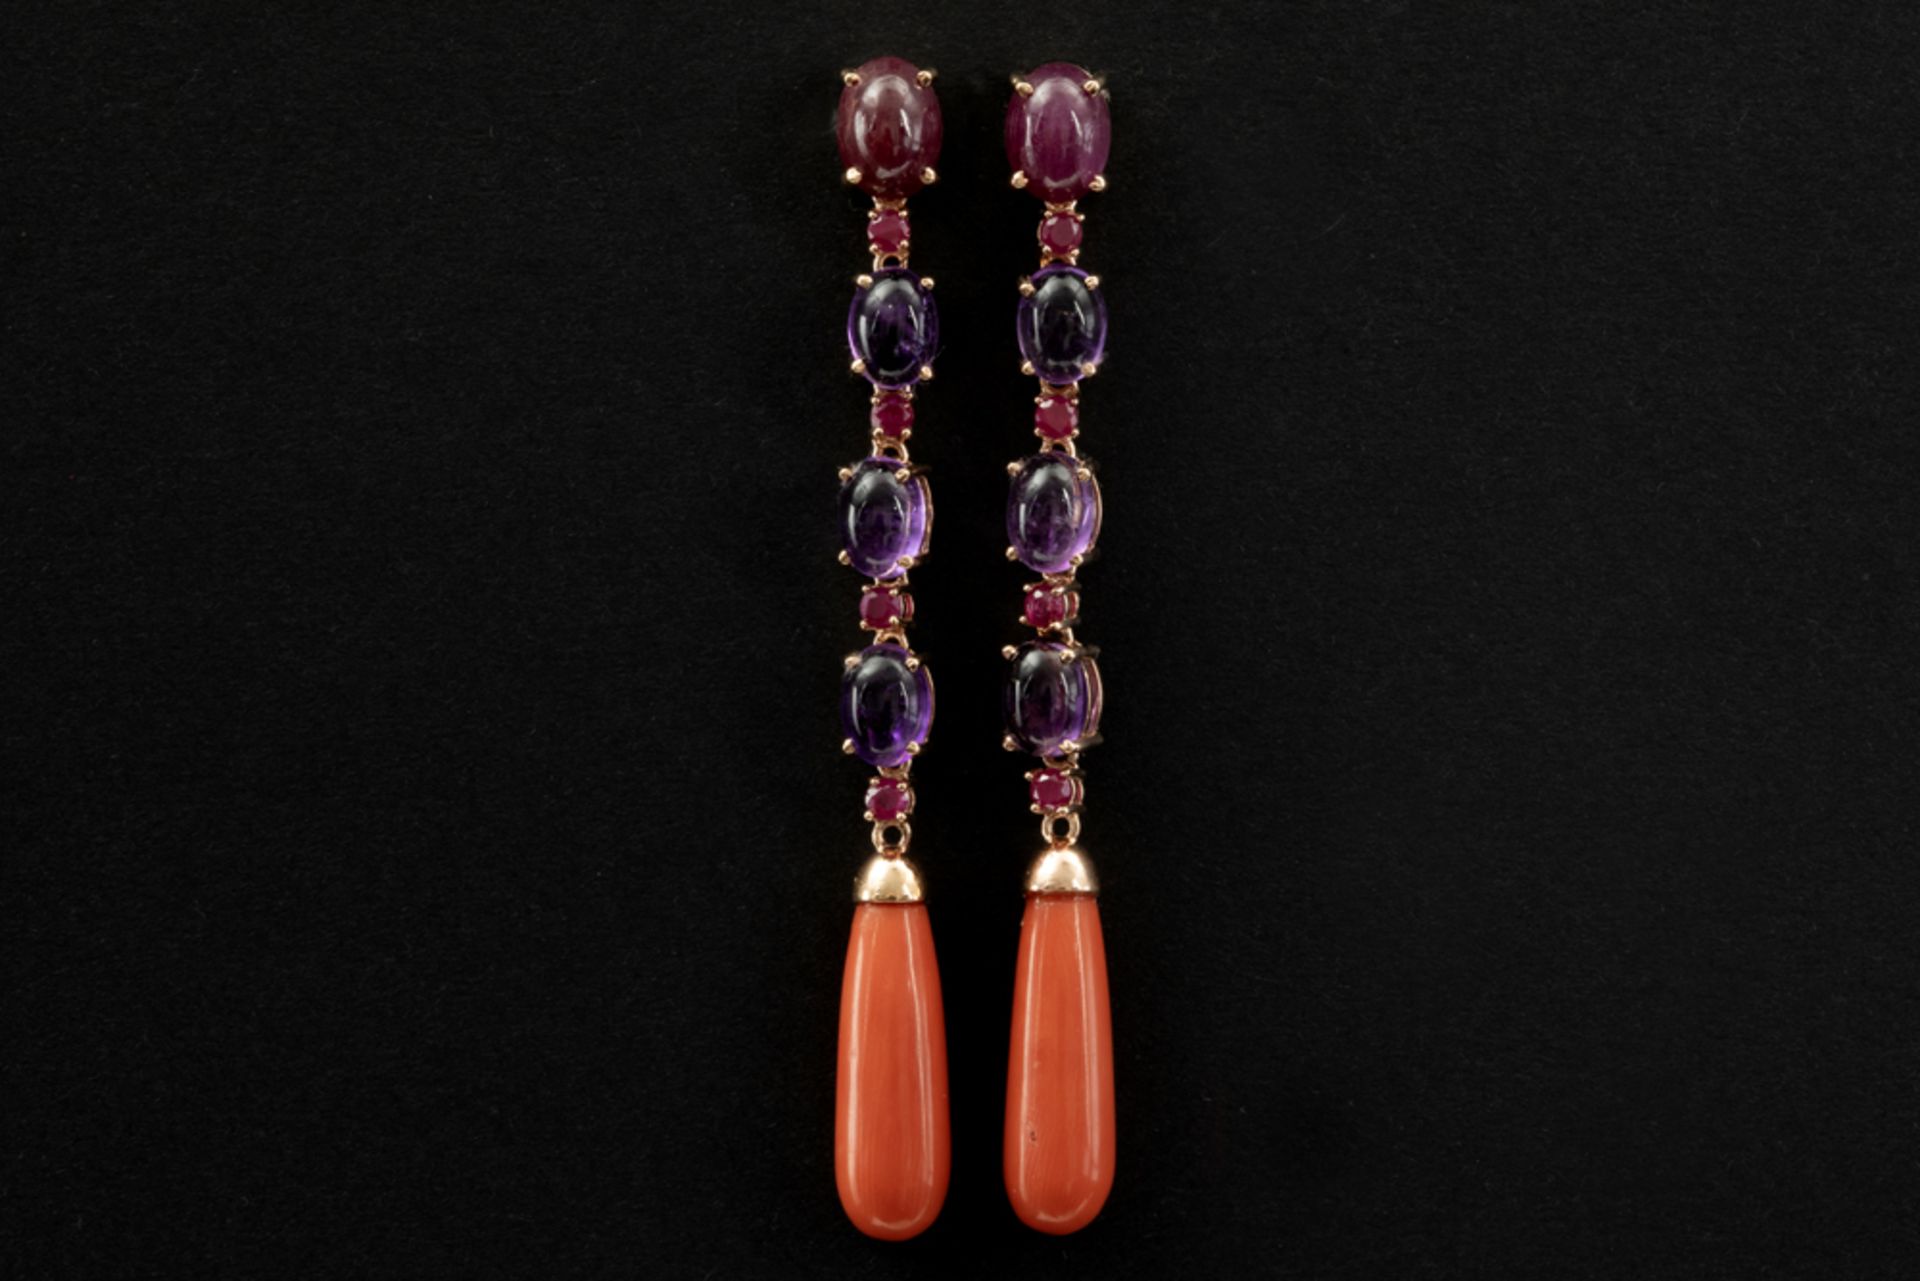 pair of elegant quite long earrings in pink gold (18 carat) with ca 7,80 carat of amethyste and